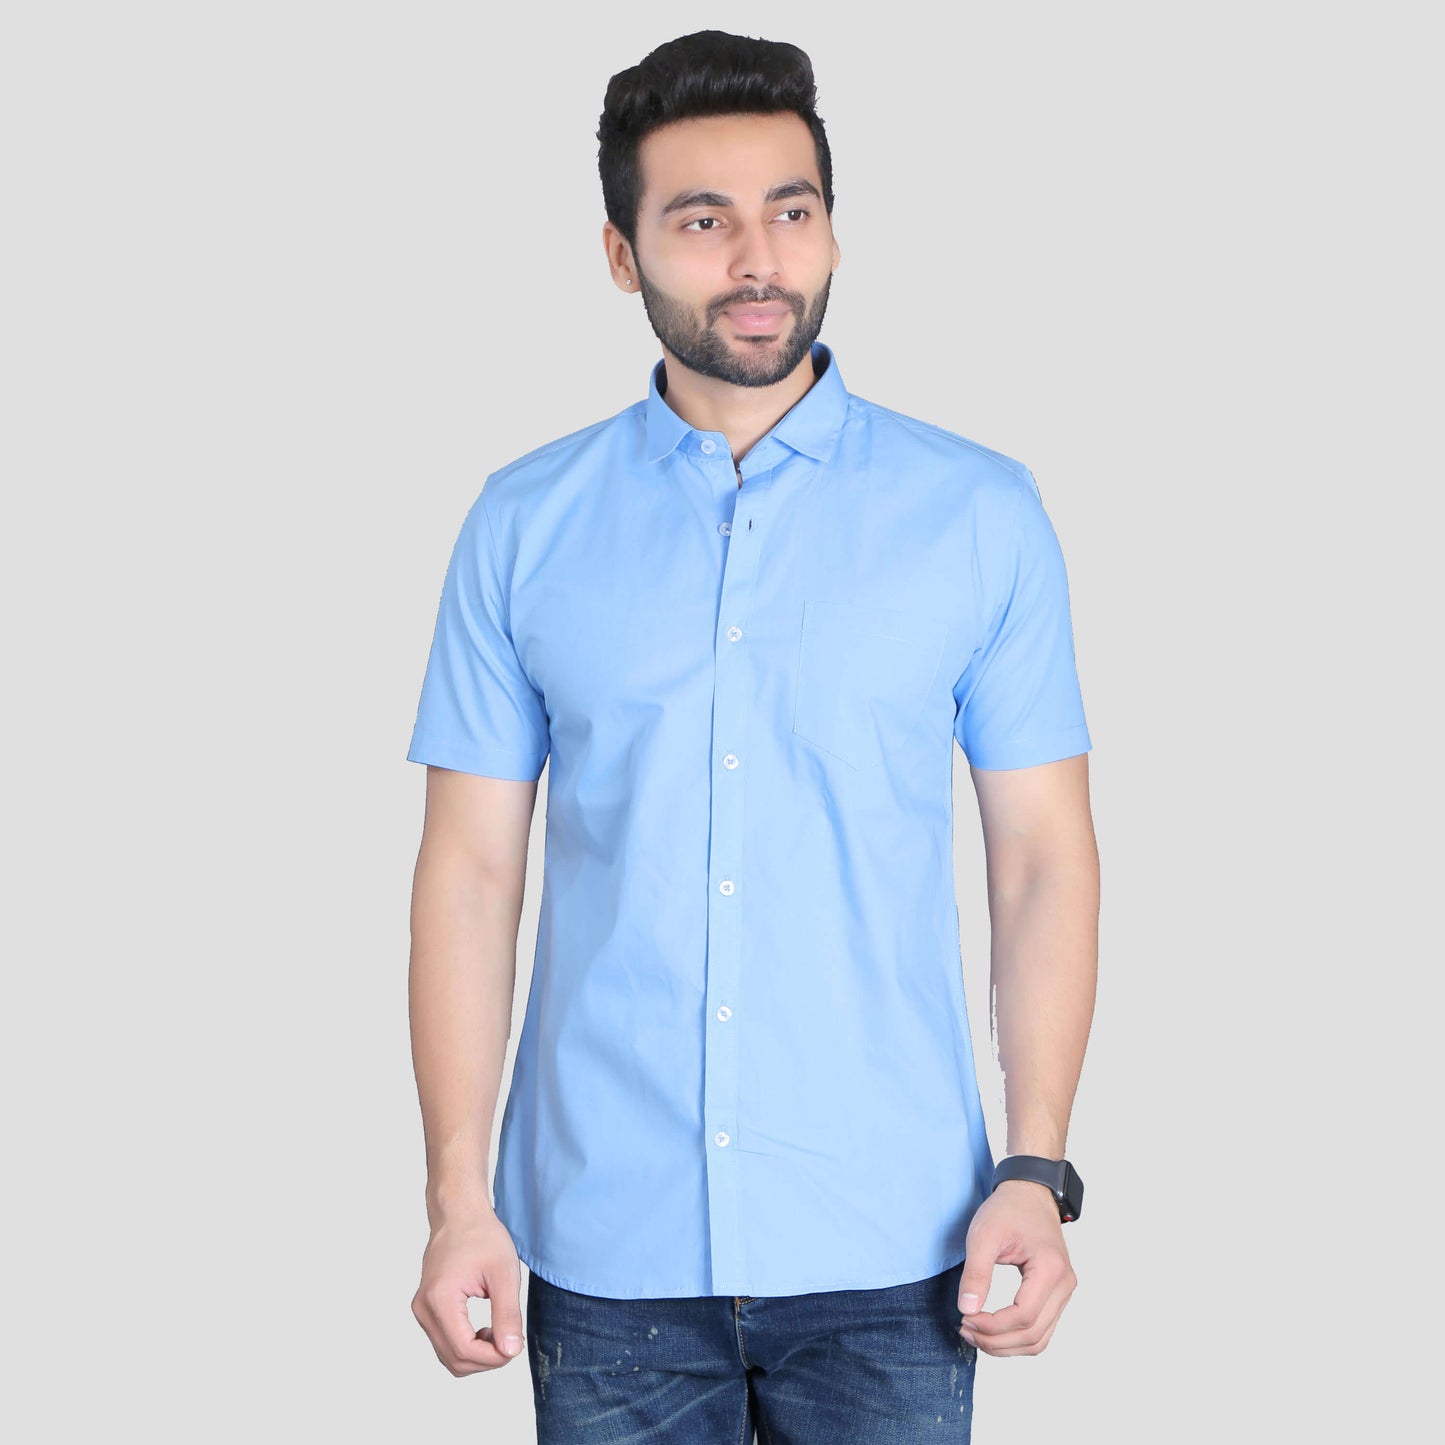 5thanfold Men's Casual Pure Cotton Half Sleeve Solid Sky Blue Slim Fit Shirt